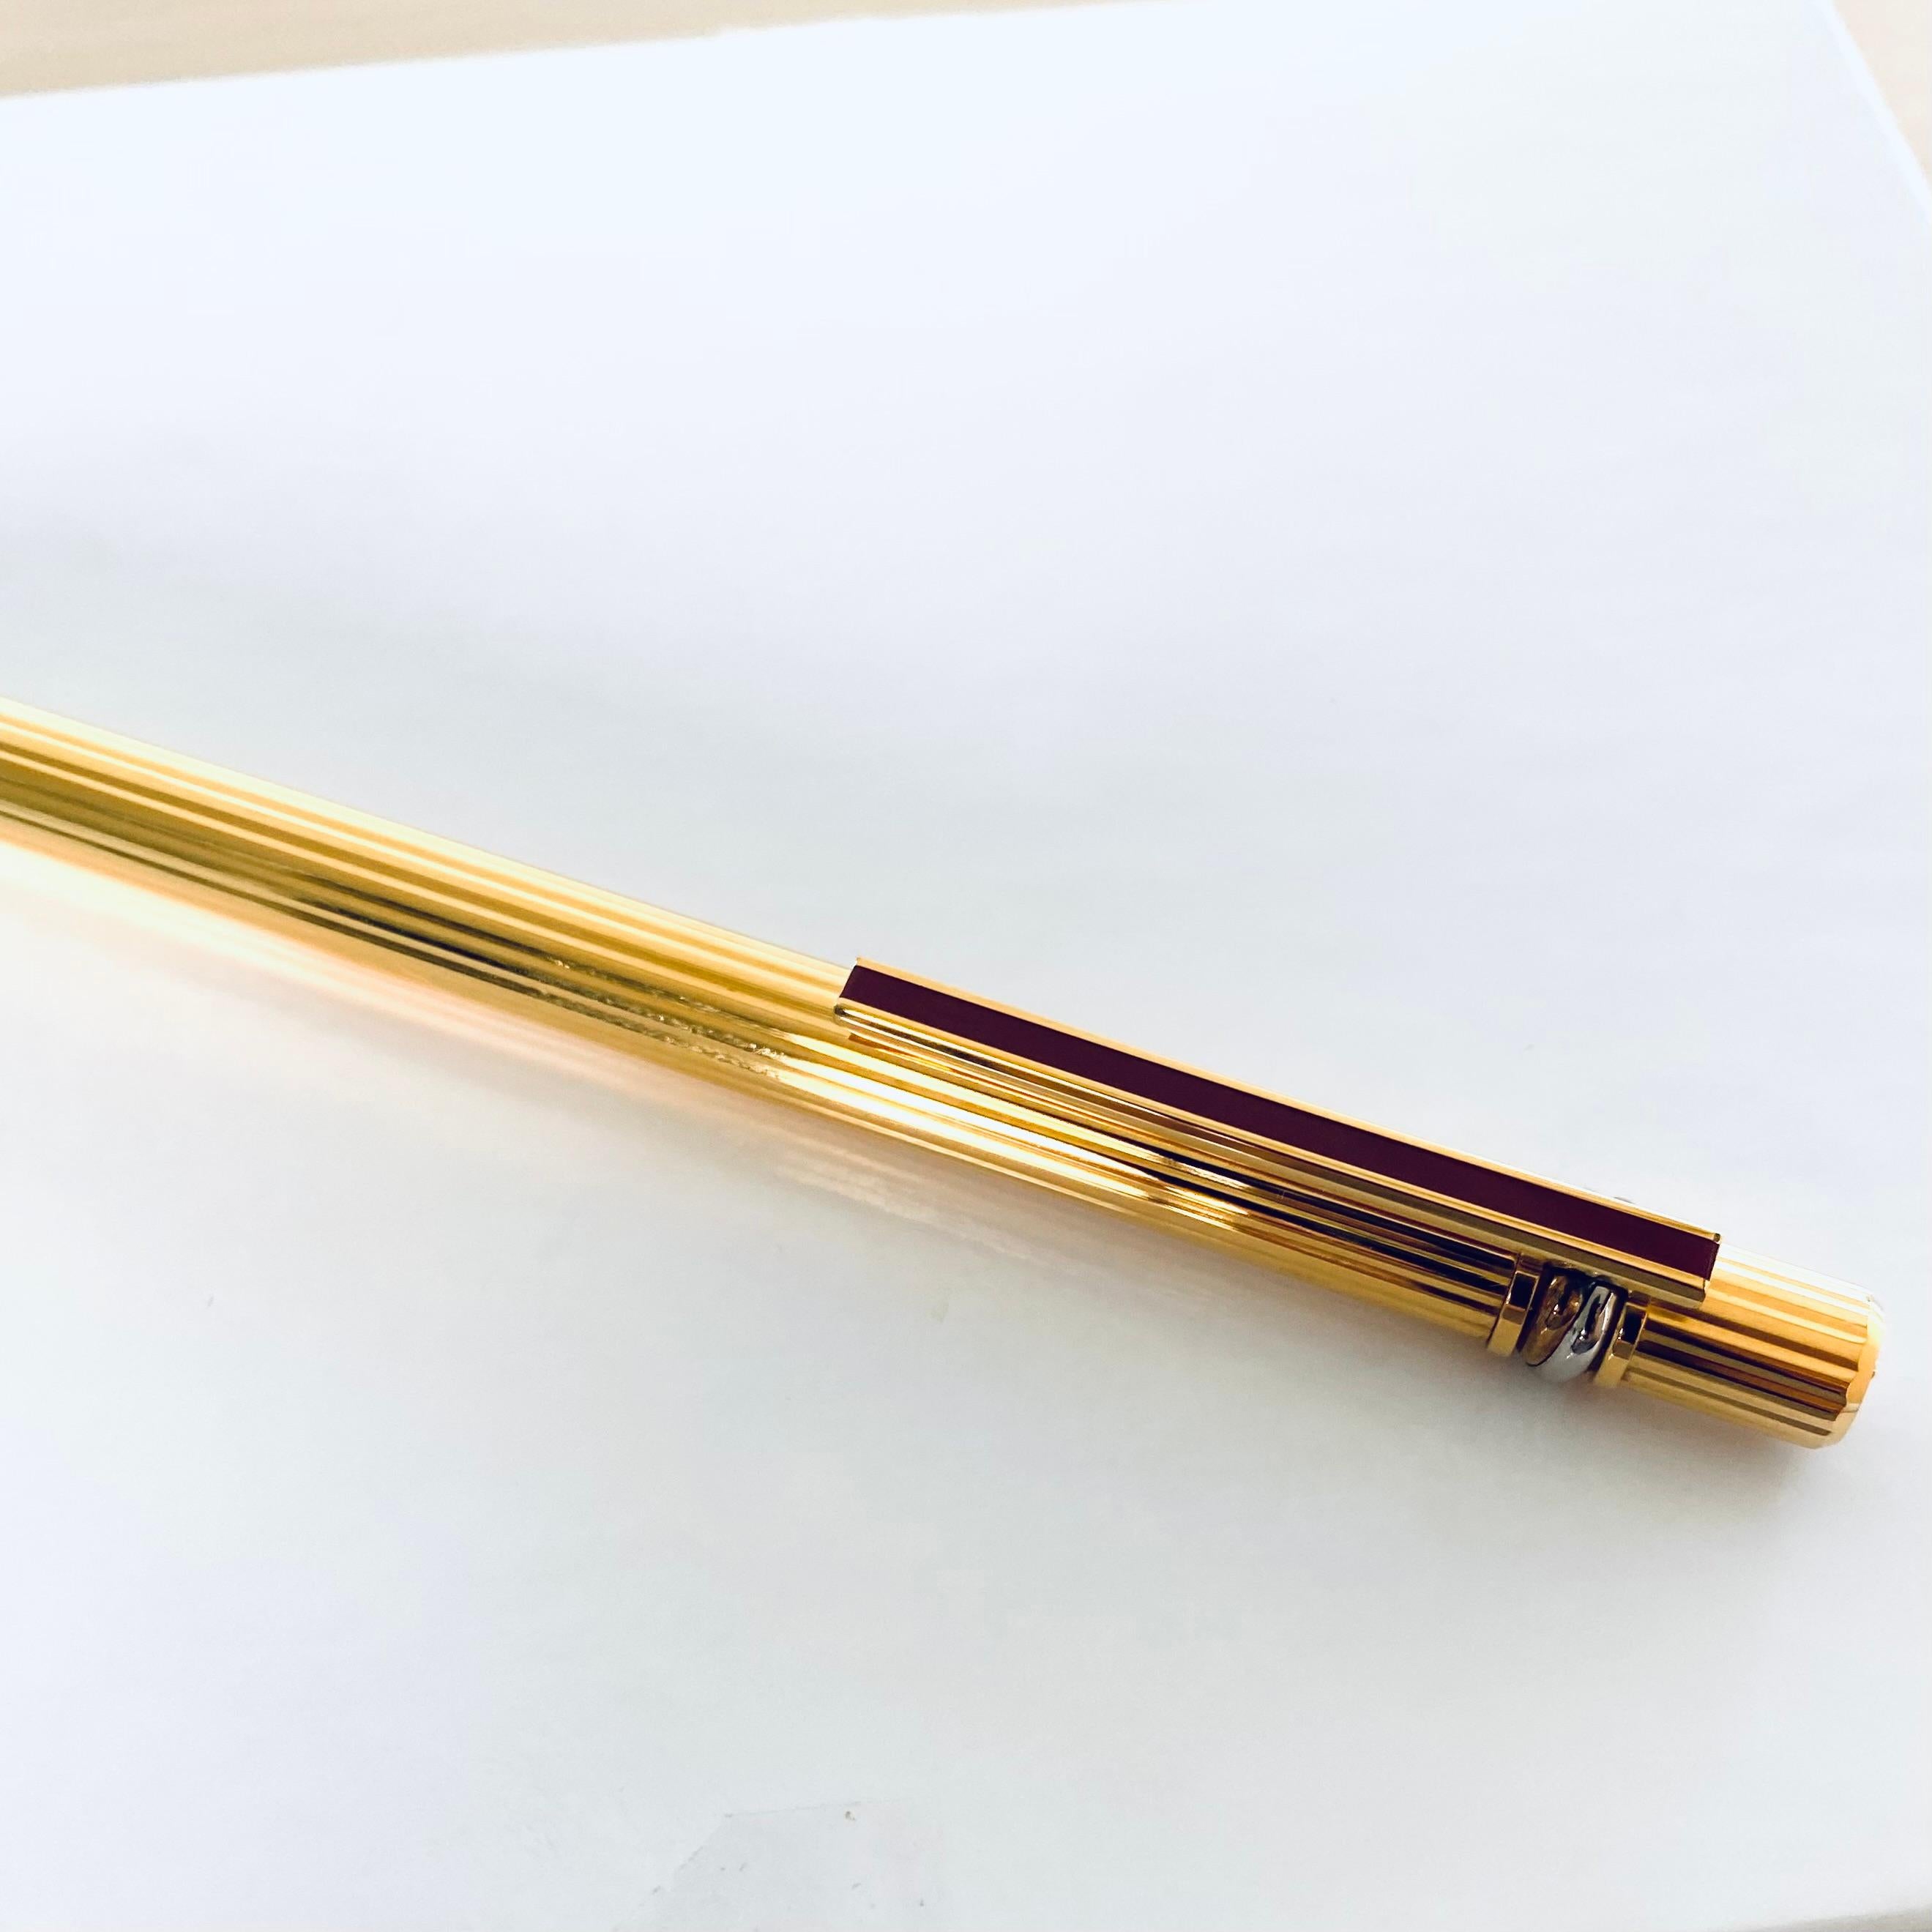 Must De Cartier Gold-Plated Ballpoint Pen Ribbed Surface Twisted Clip #356243 1